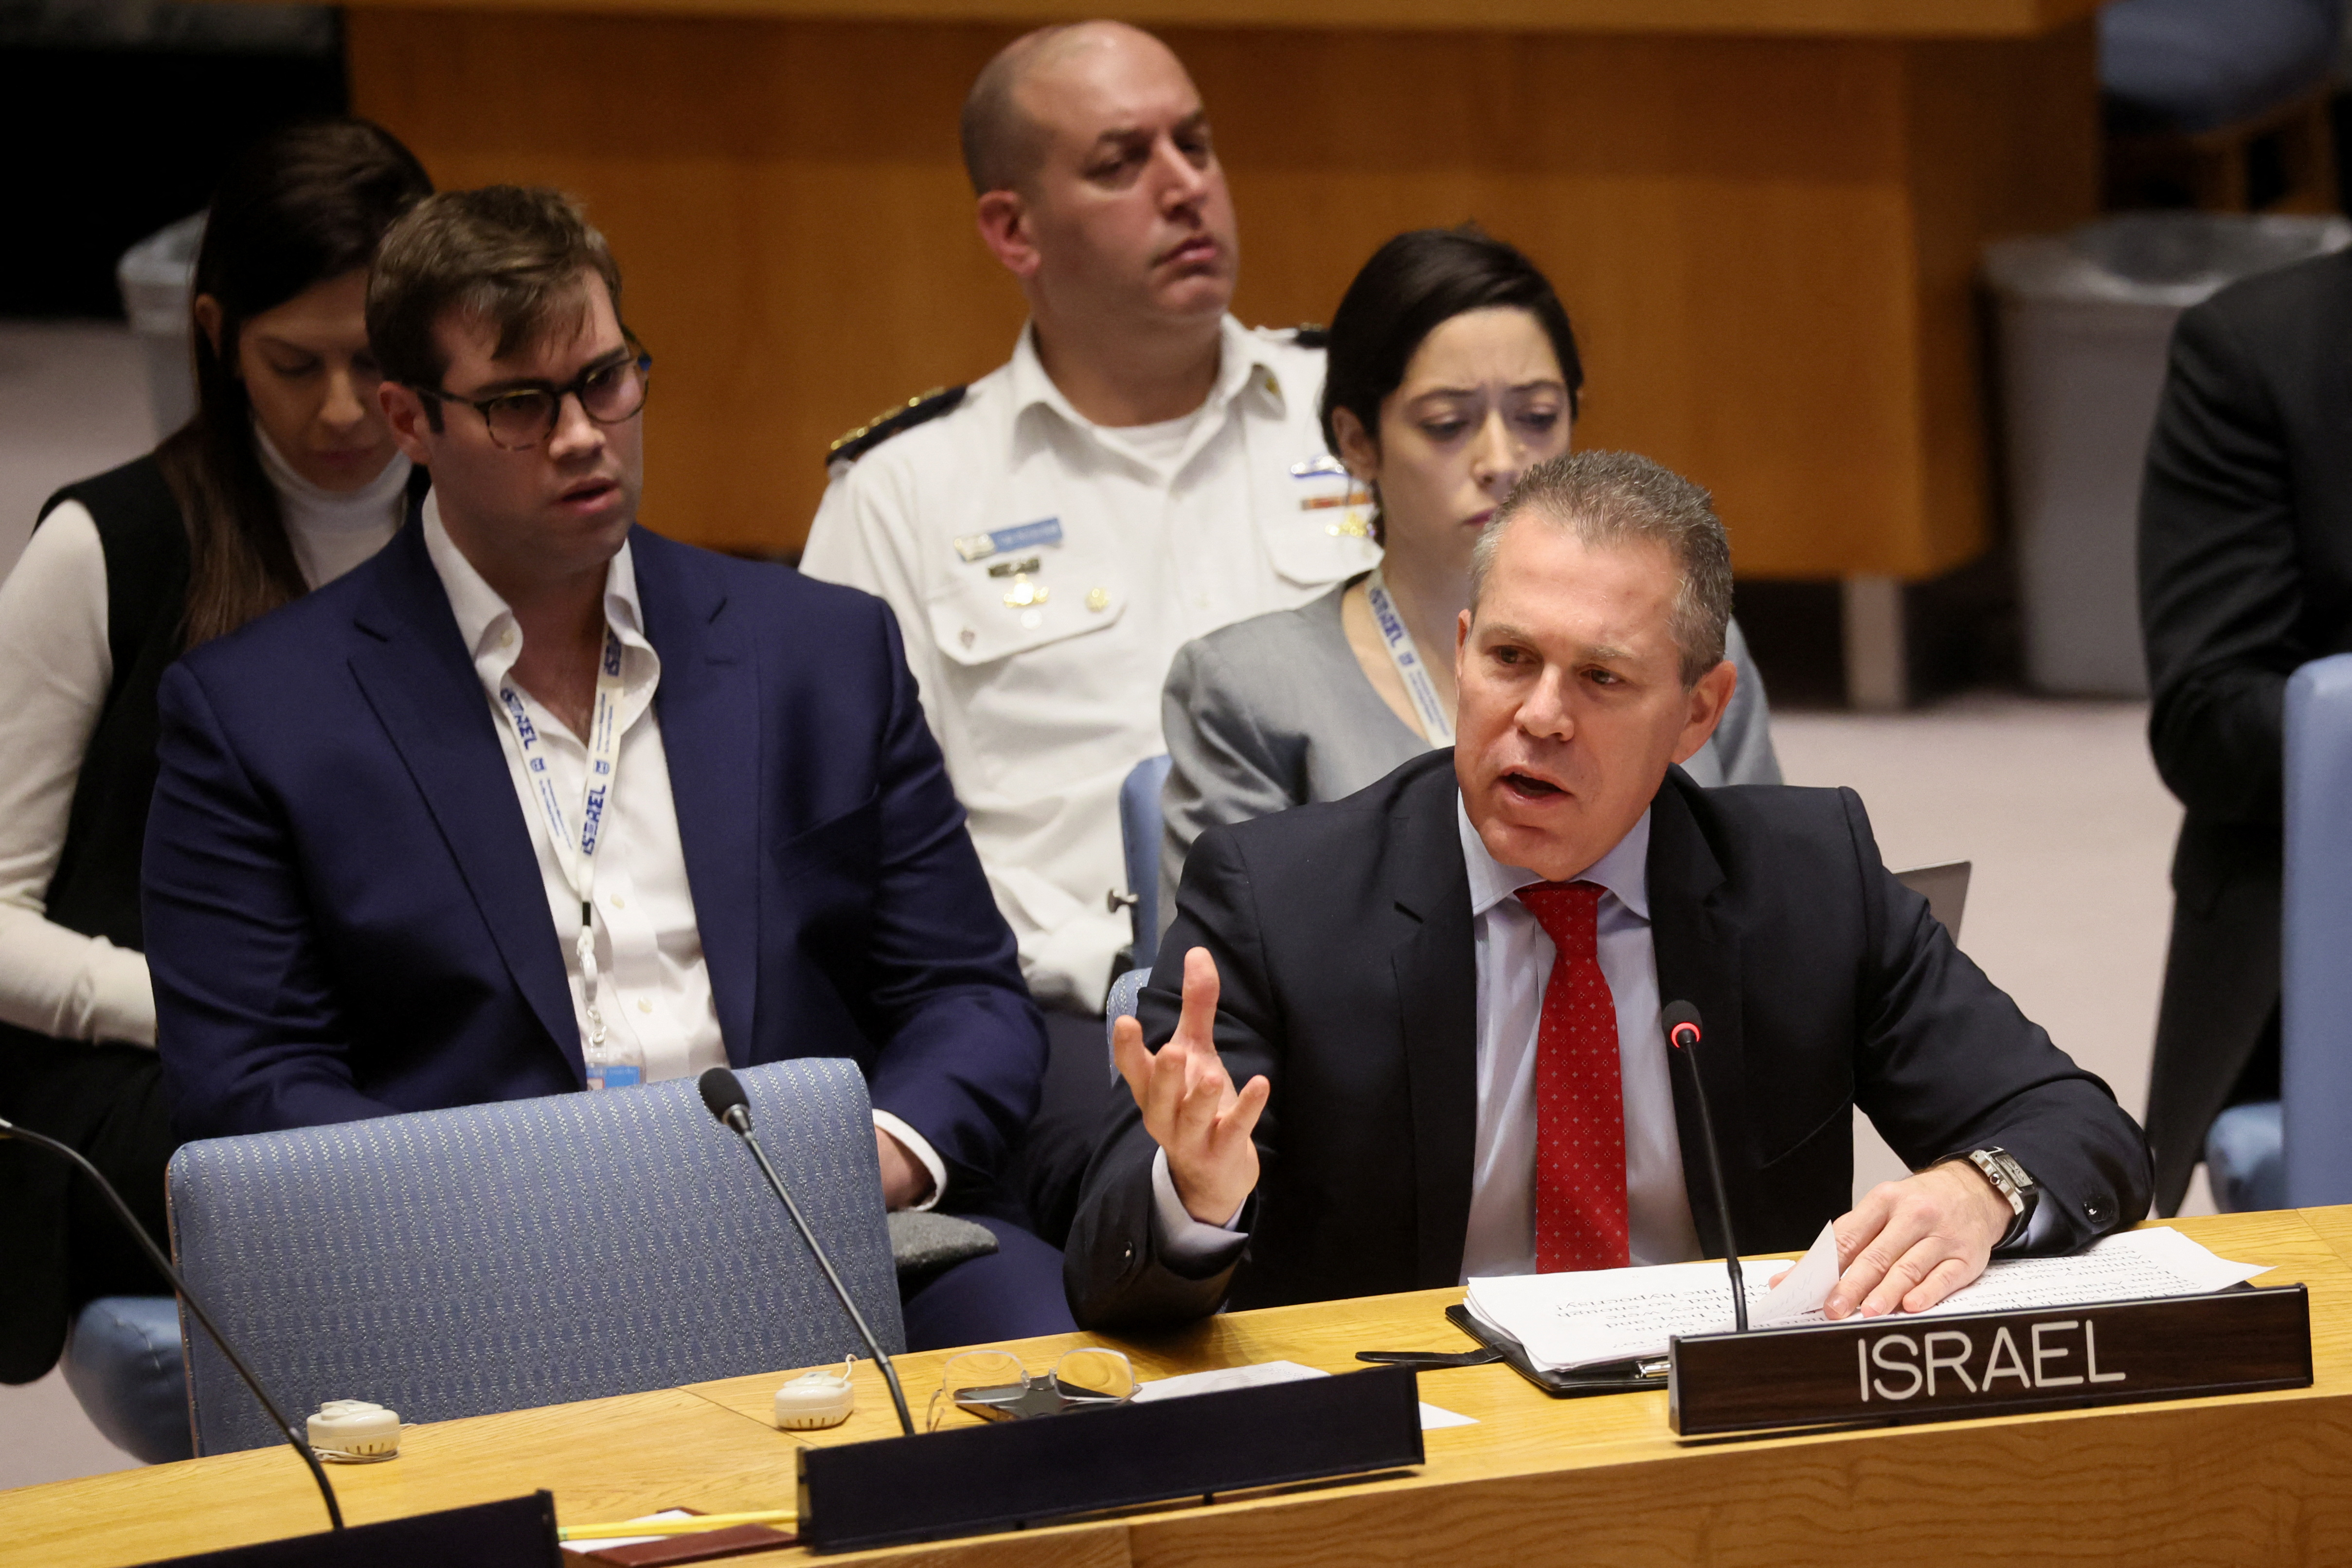 Israeli ambassador to the UN Gilad Erdan attends a UN Security Council meeting on the conflict between Israel and Hamas, in New York City